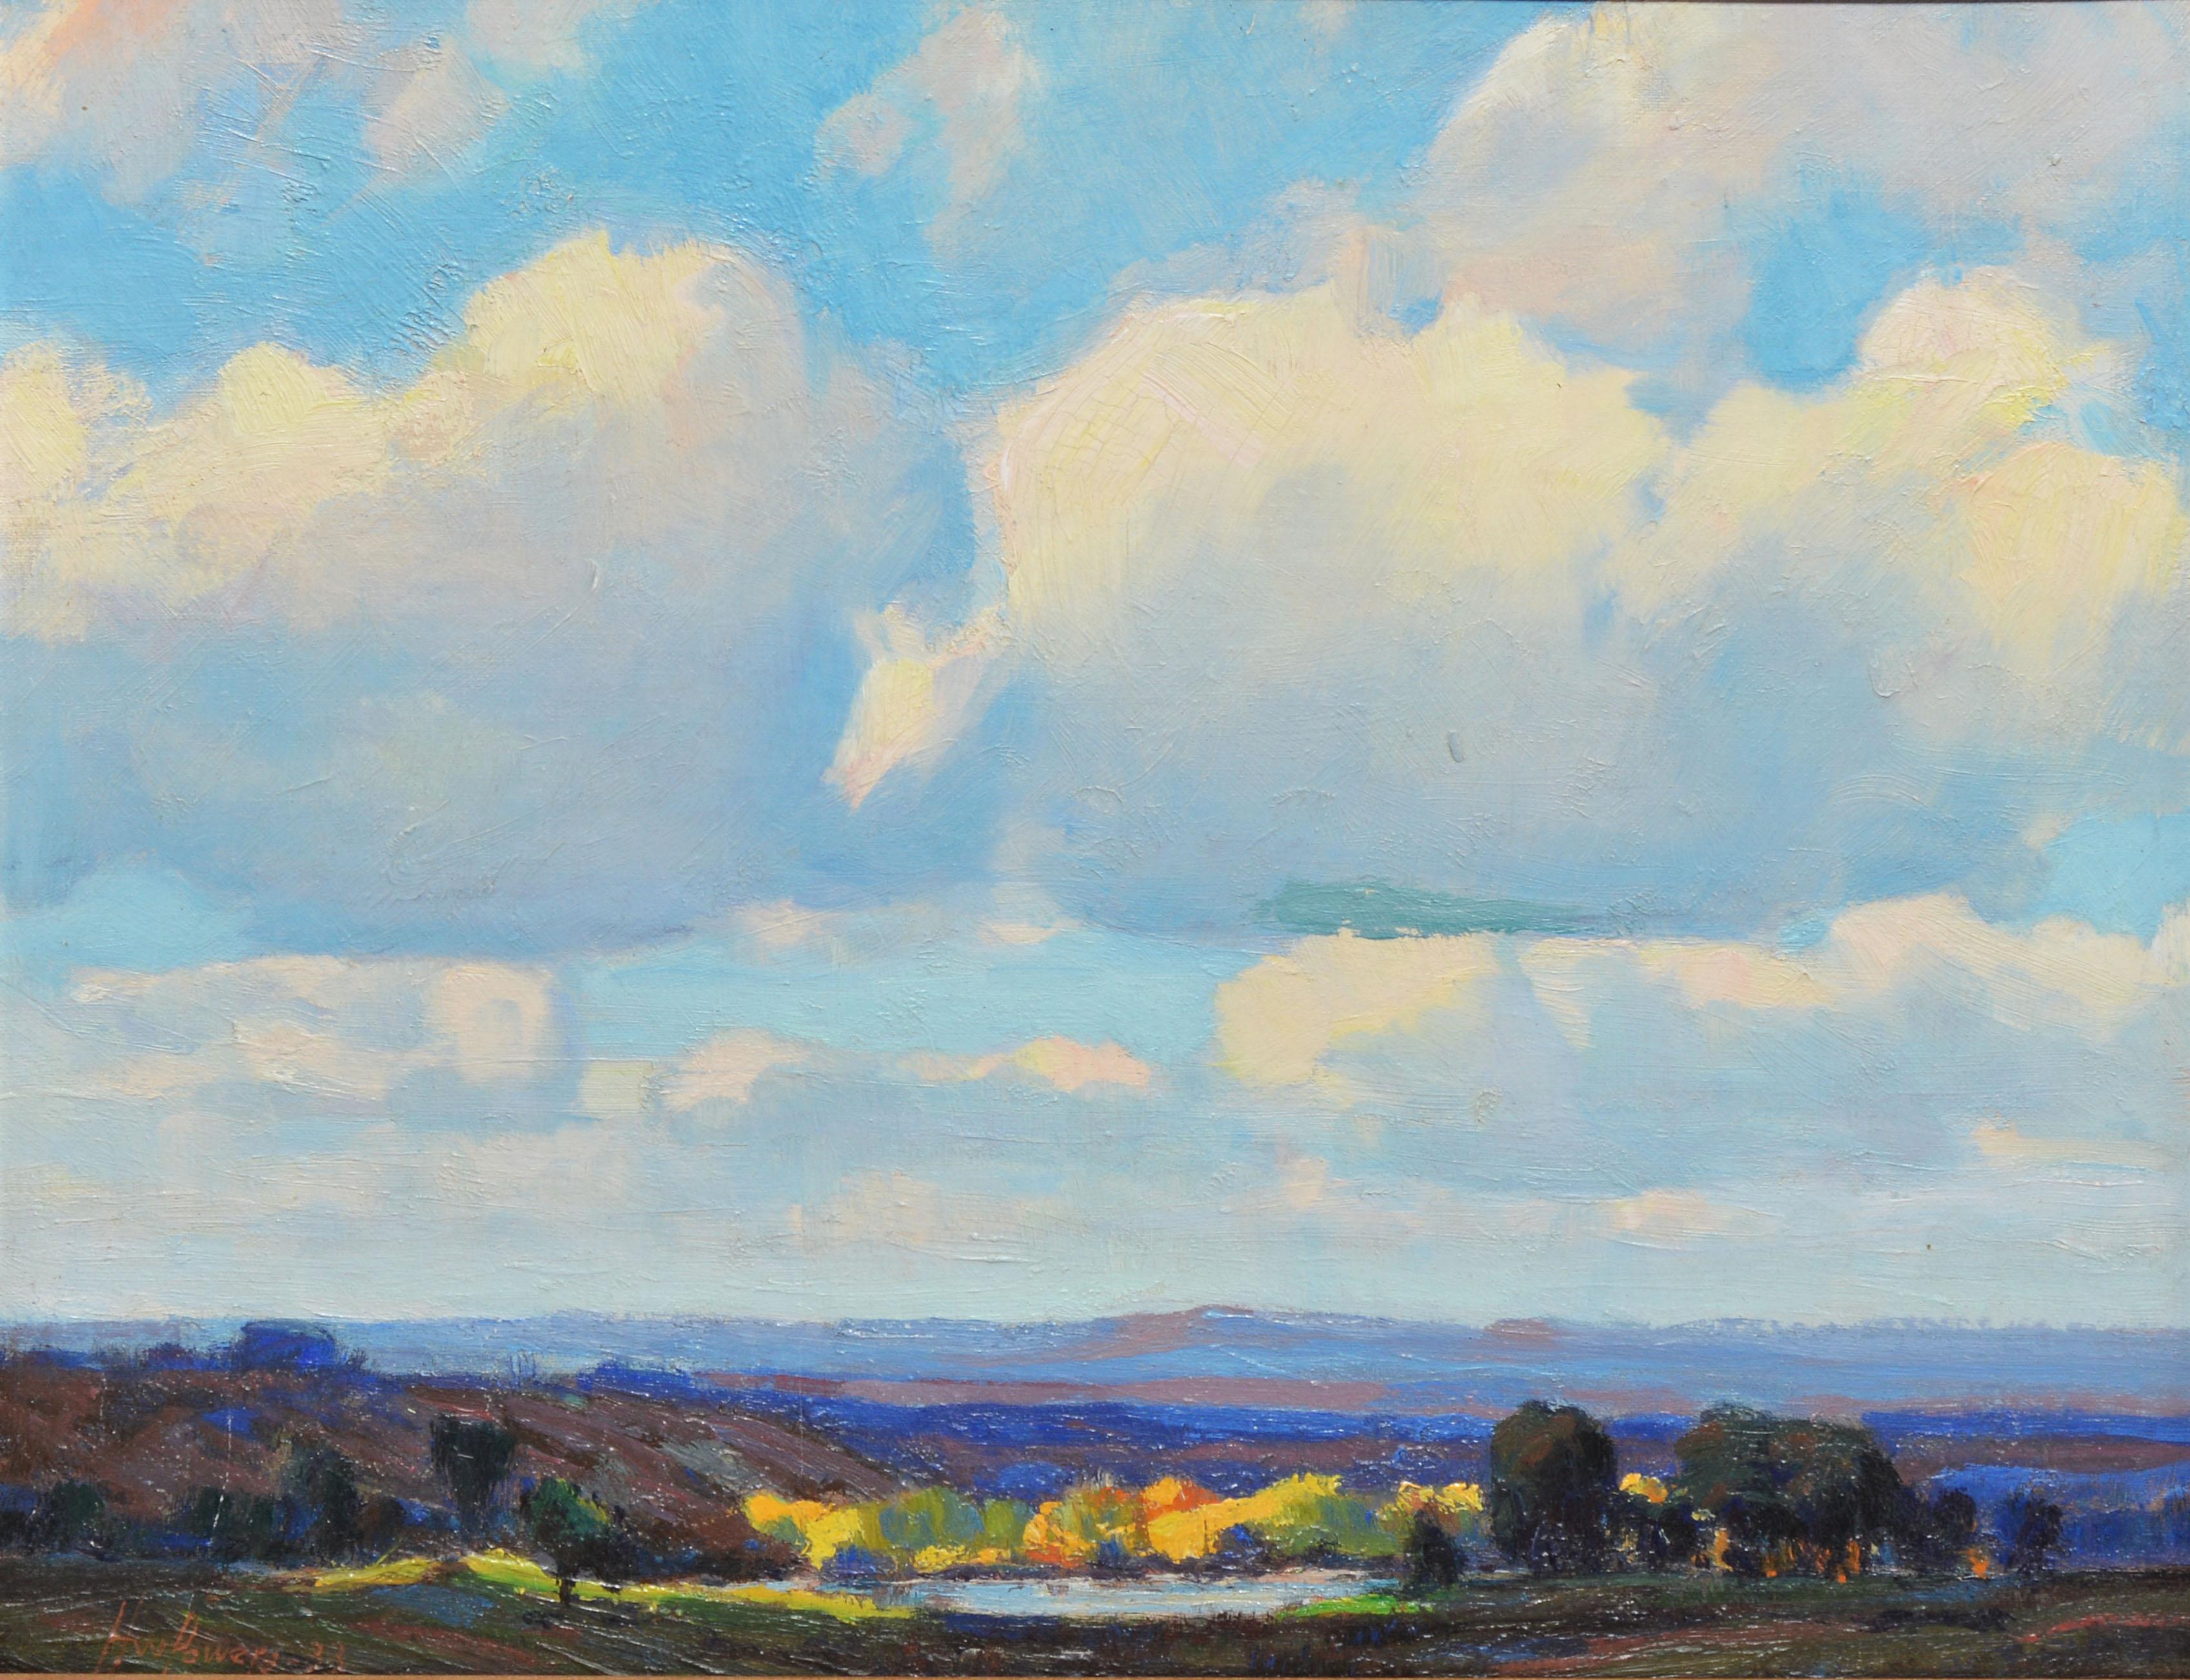 Antique impressionist view of a panoramic landscape by Harry William Powers  (1880 - 1957).  Oil on board, circa 1933.  Signed.  Displayed in a giltwood frame.  Image, 15.5